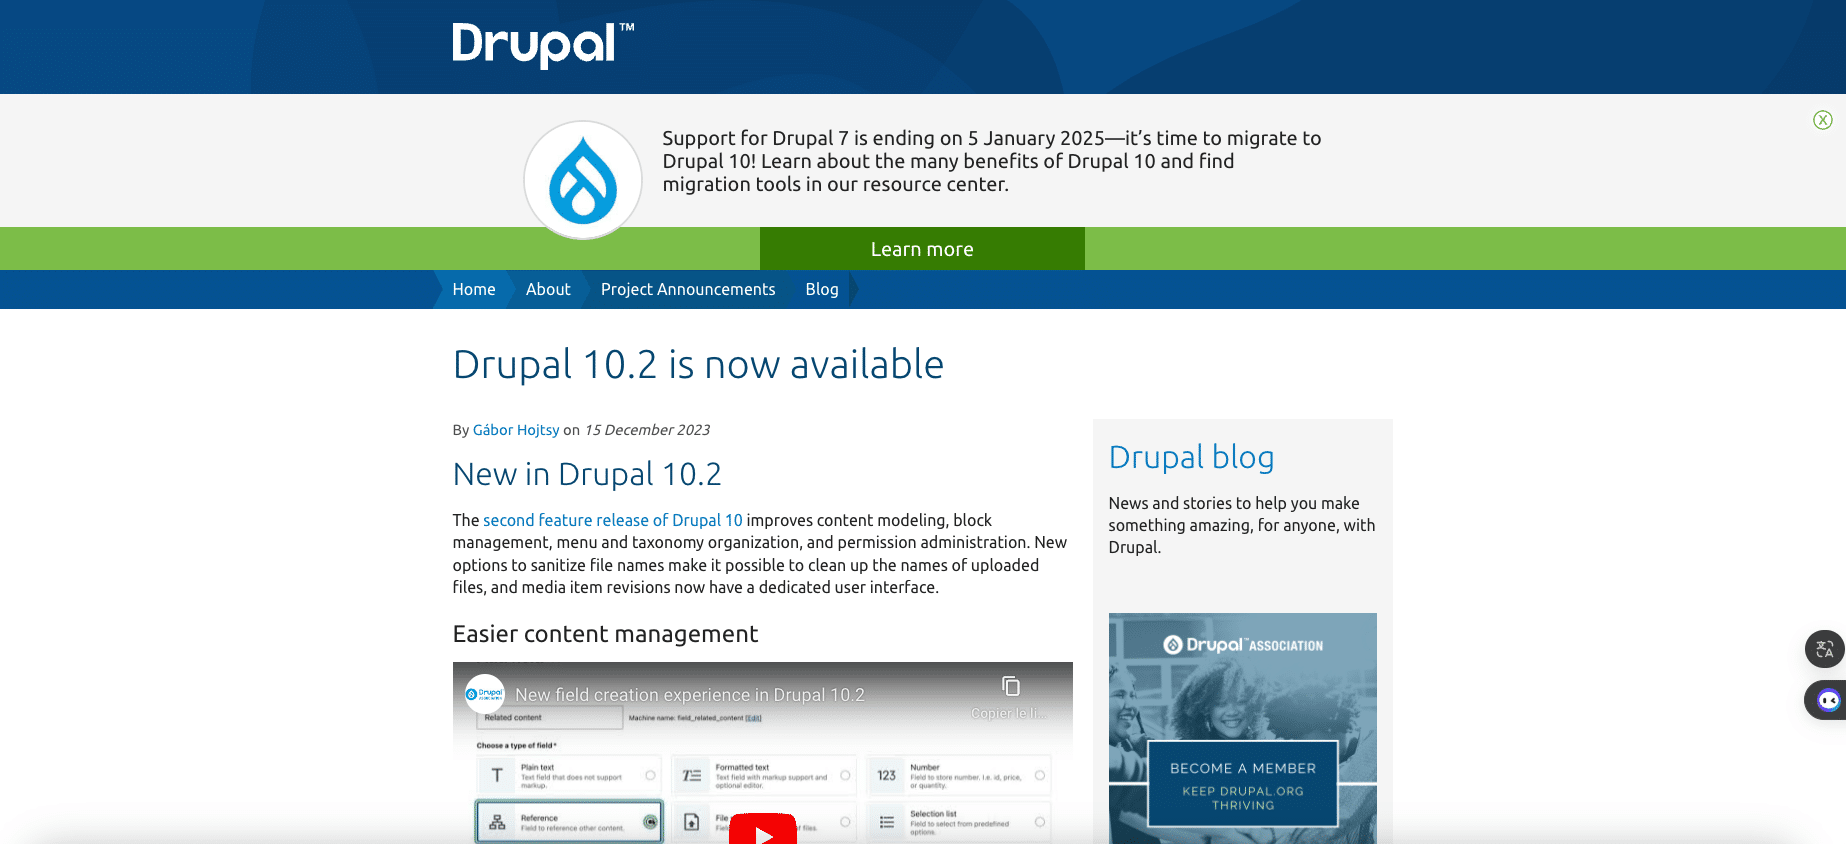 Overview of the information page on the blog fort launch of the Drupal 10.2 tool